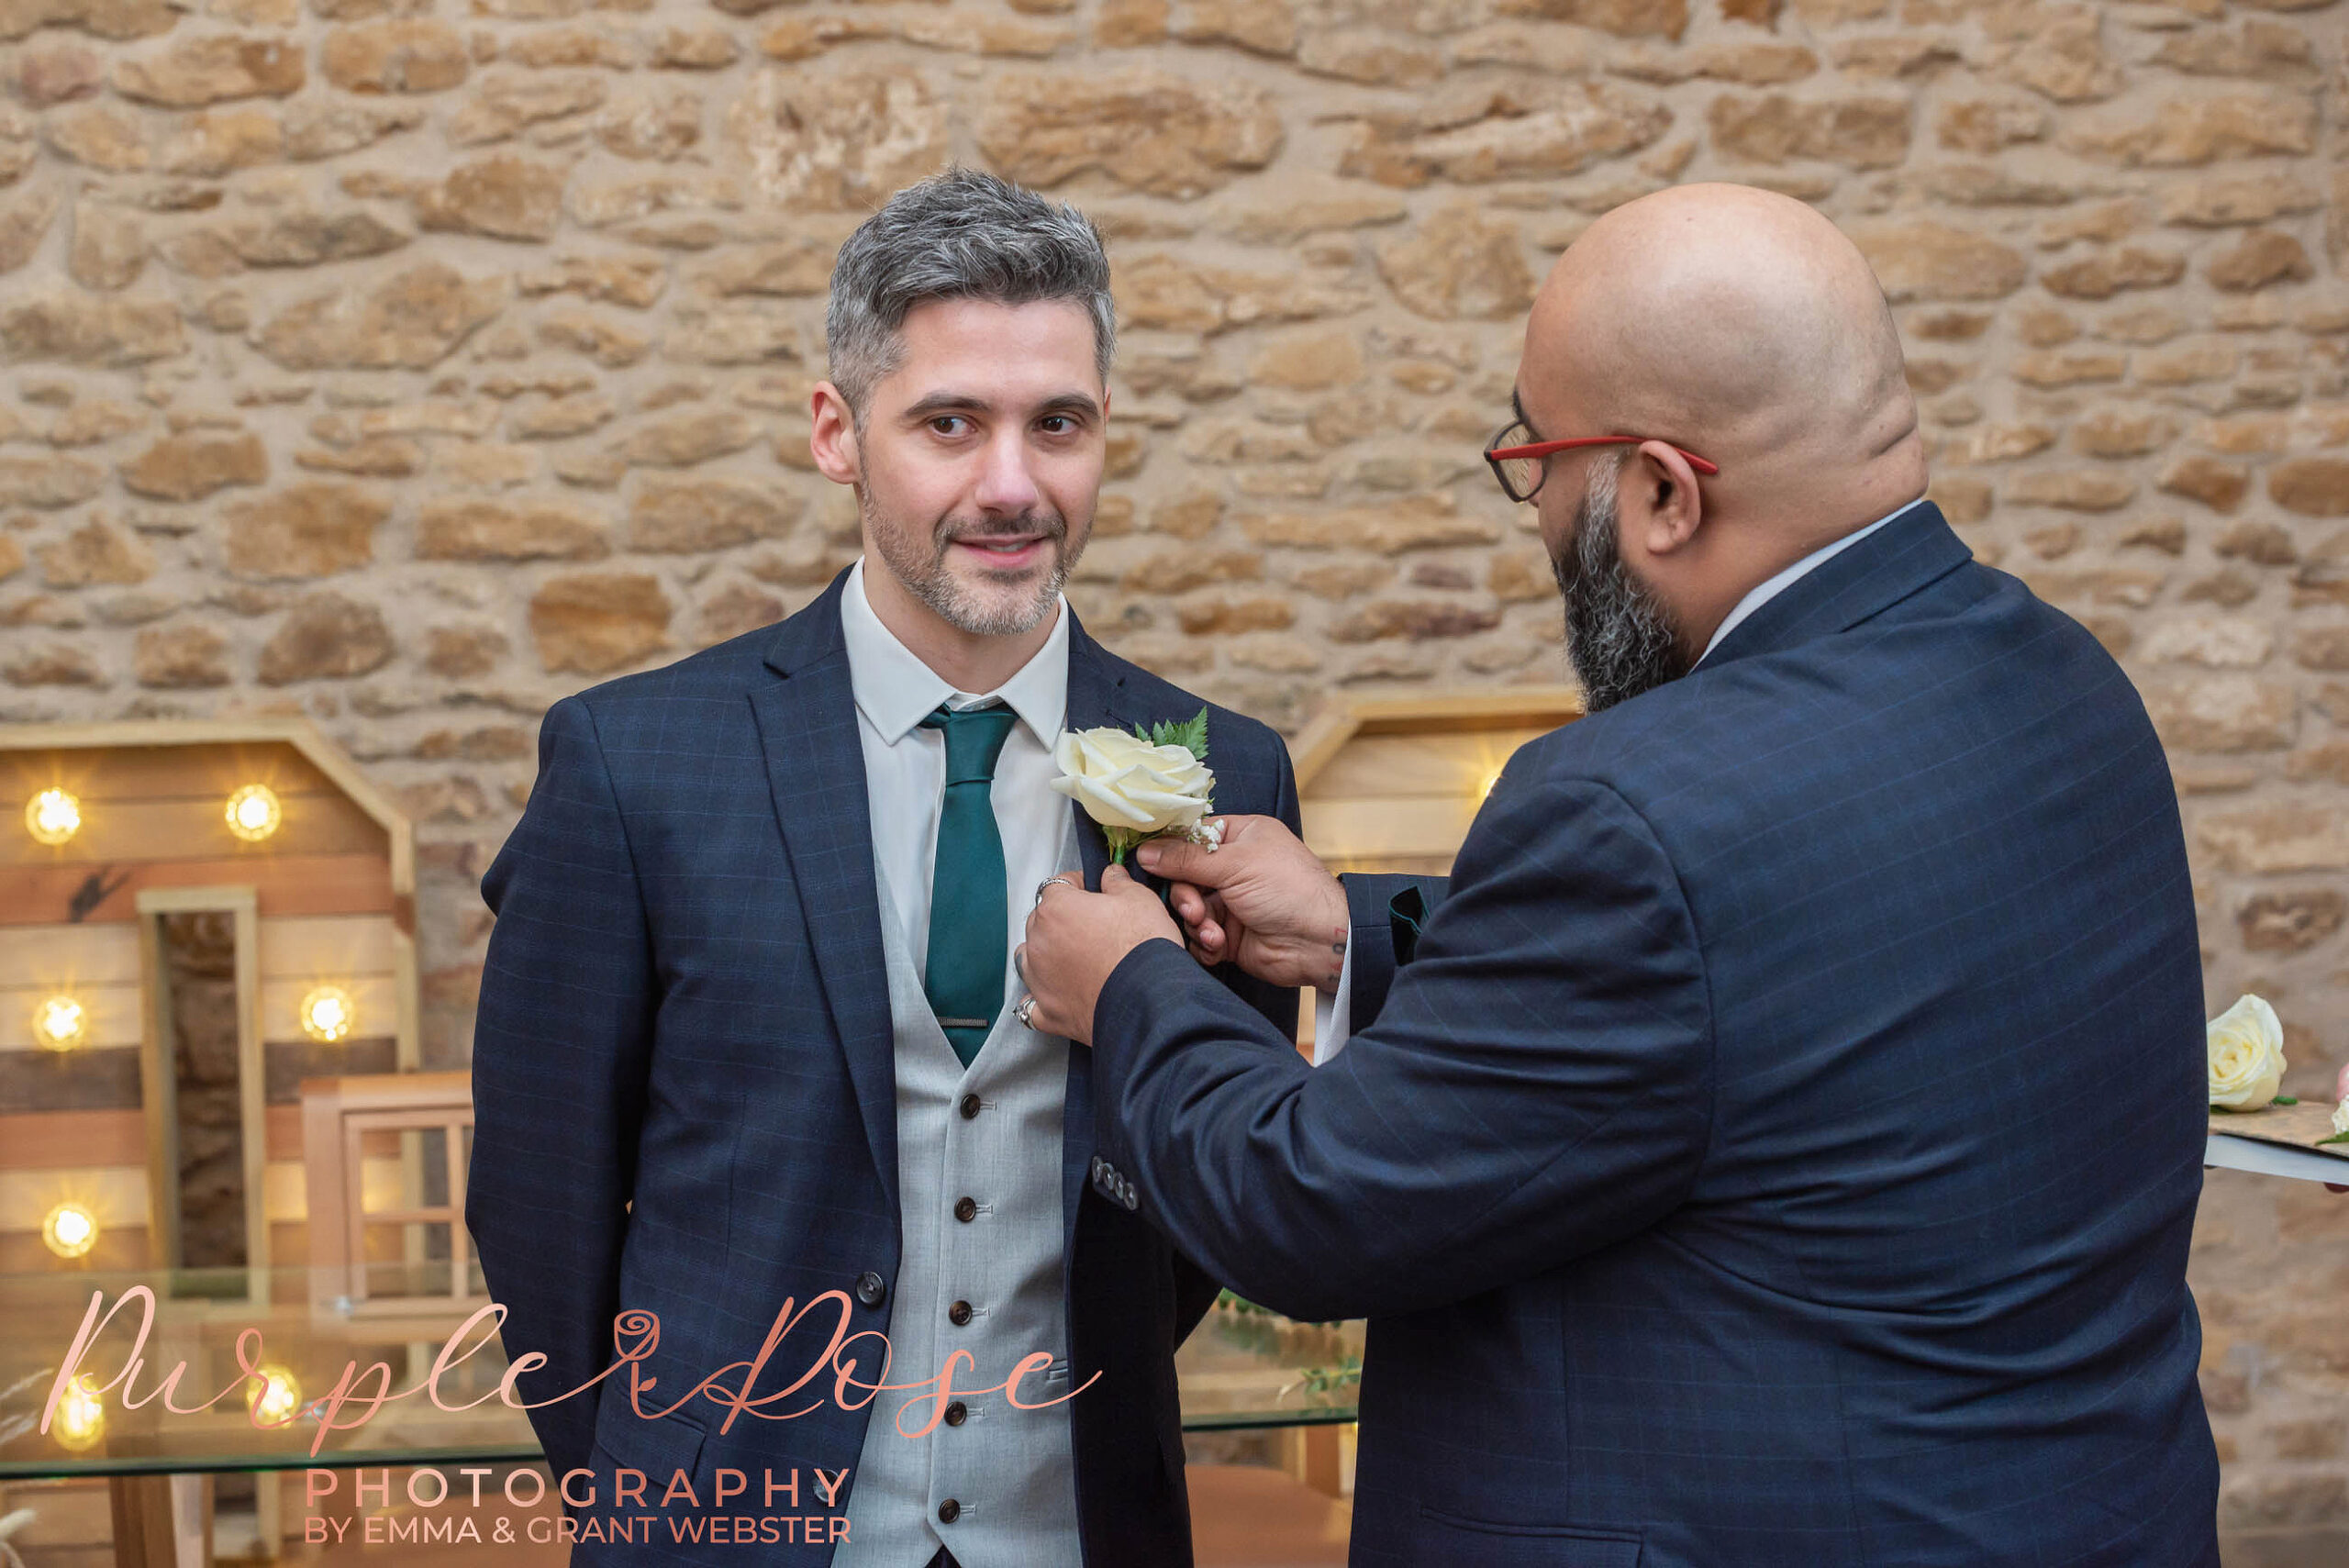 Photo of a groom having his buttonhole adjusted by his best man on his wedding day in Milton Keynes